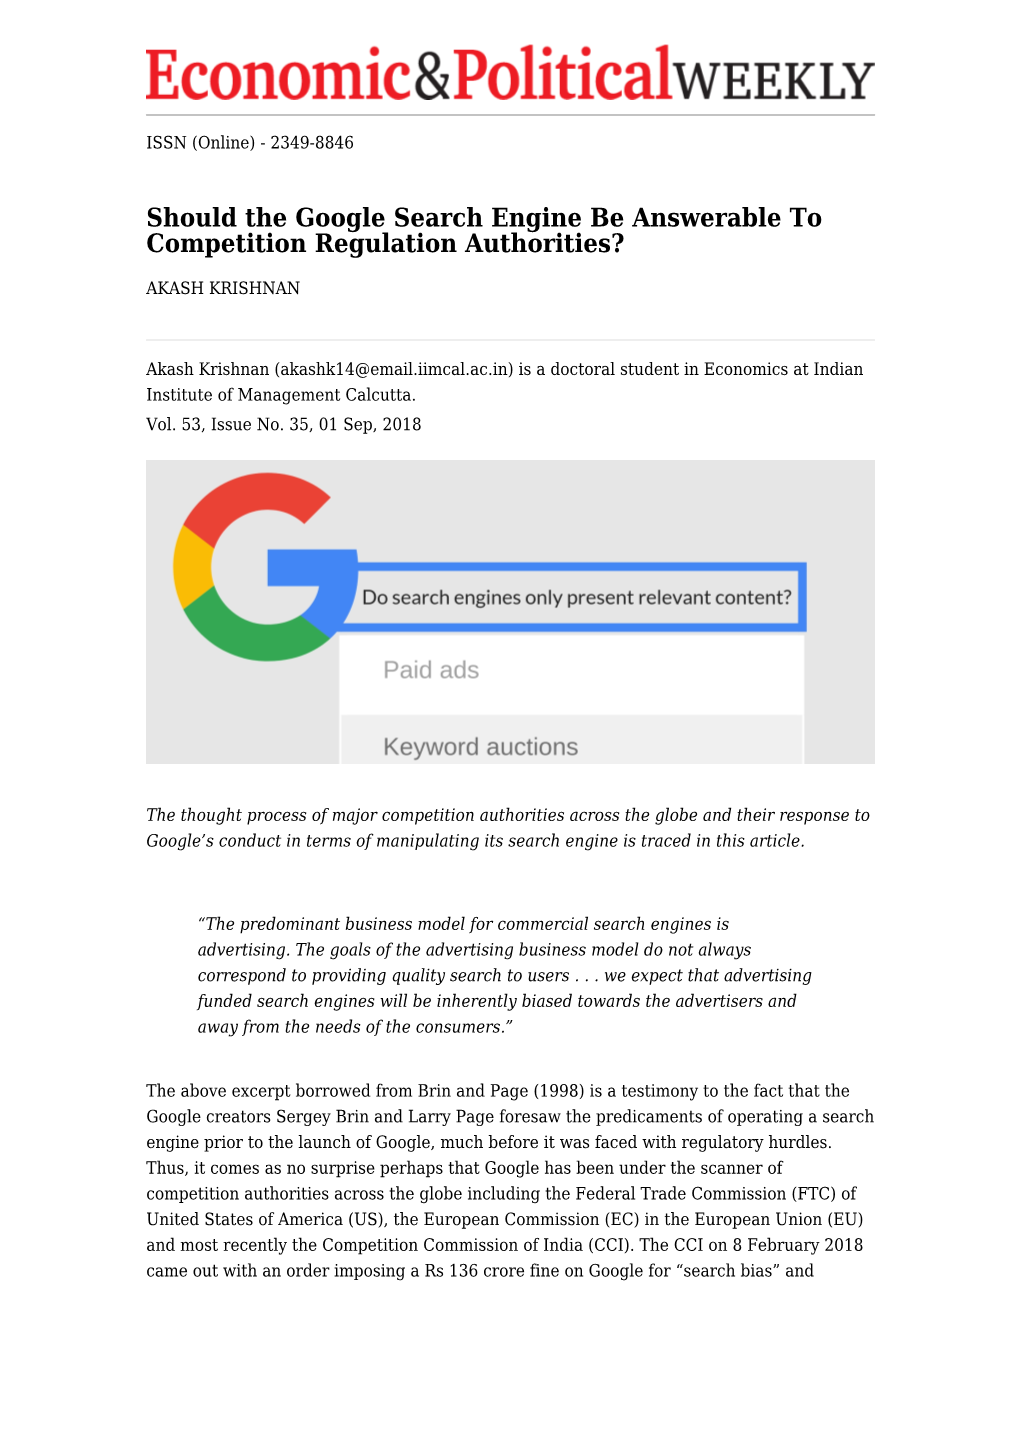 Should the Google Search Engine Be Answerable to Competition Regulation Authorities?